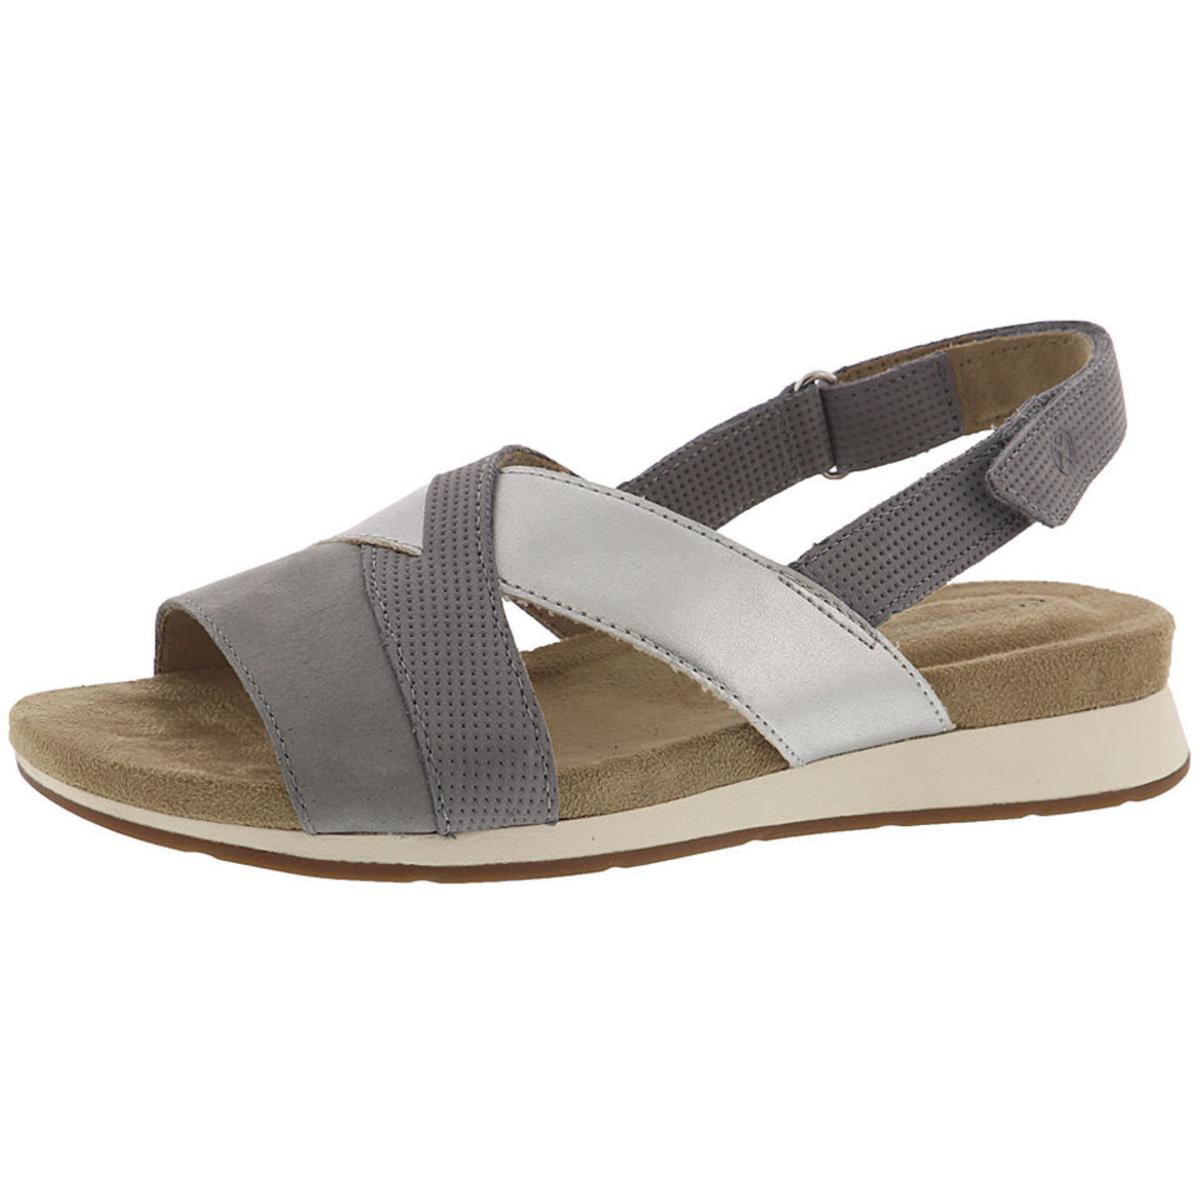 Hush Puppies Womens Pepper Gray Slingback Sandals Shoes 7 Wide (C,D,W ...